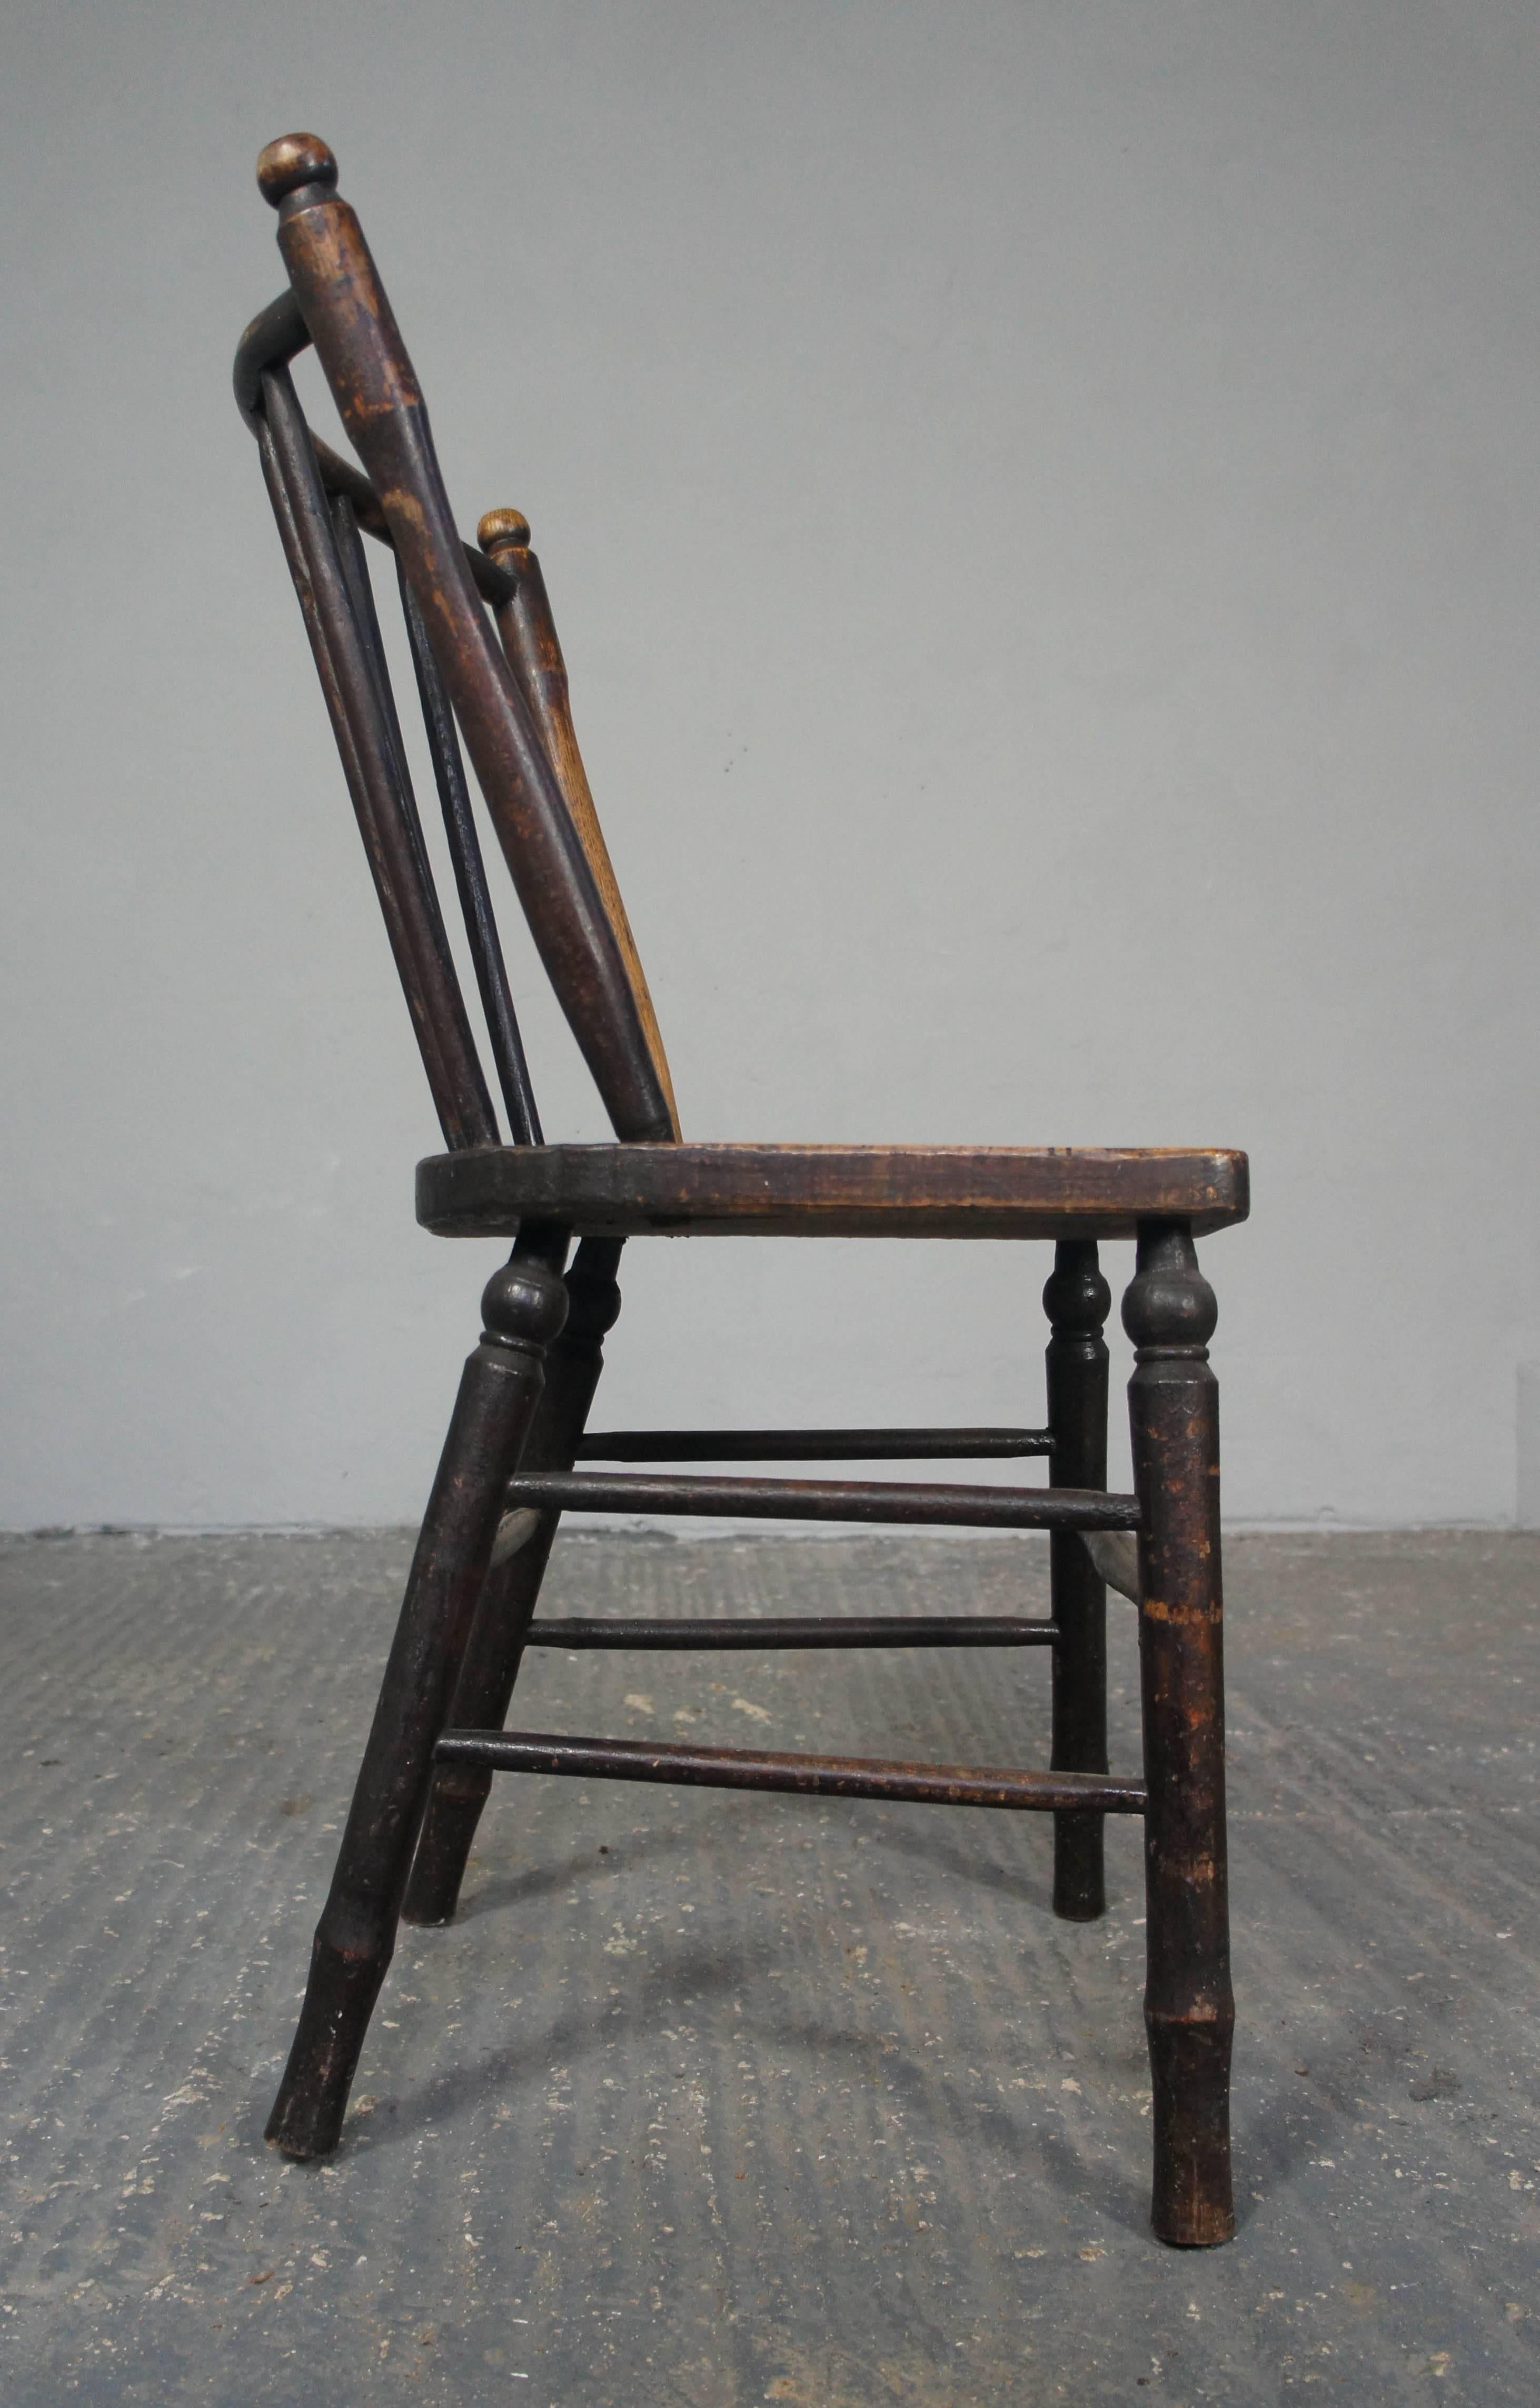 An early example of an Irish ash and elm kitchen chair. Simple, rustic design.